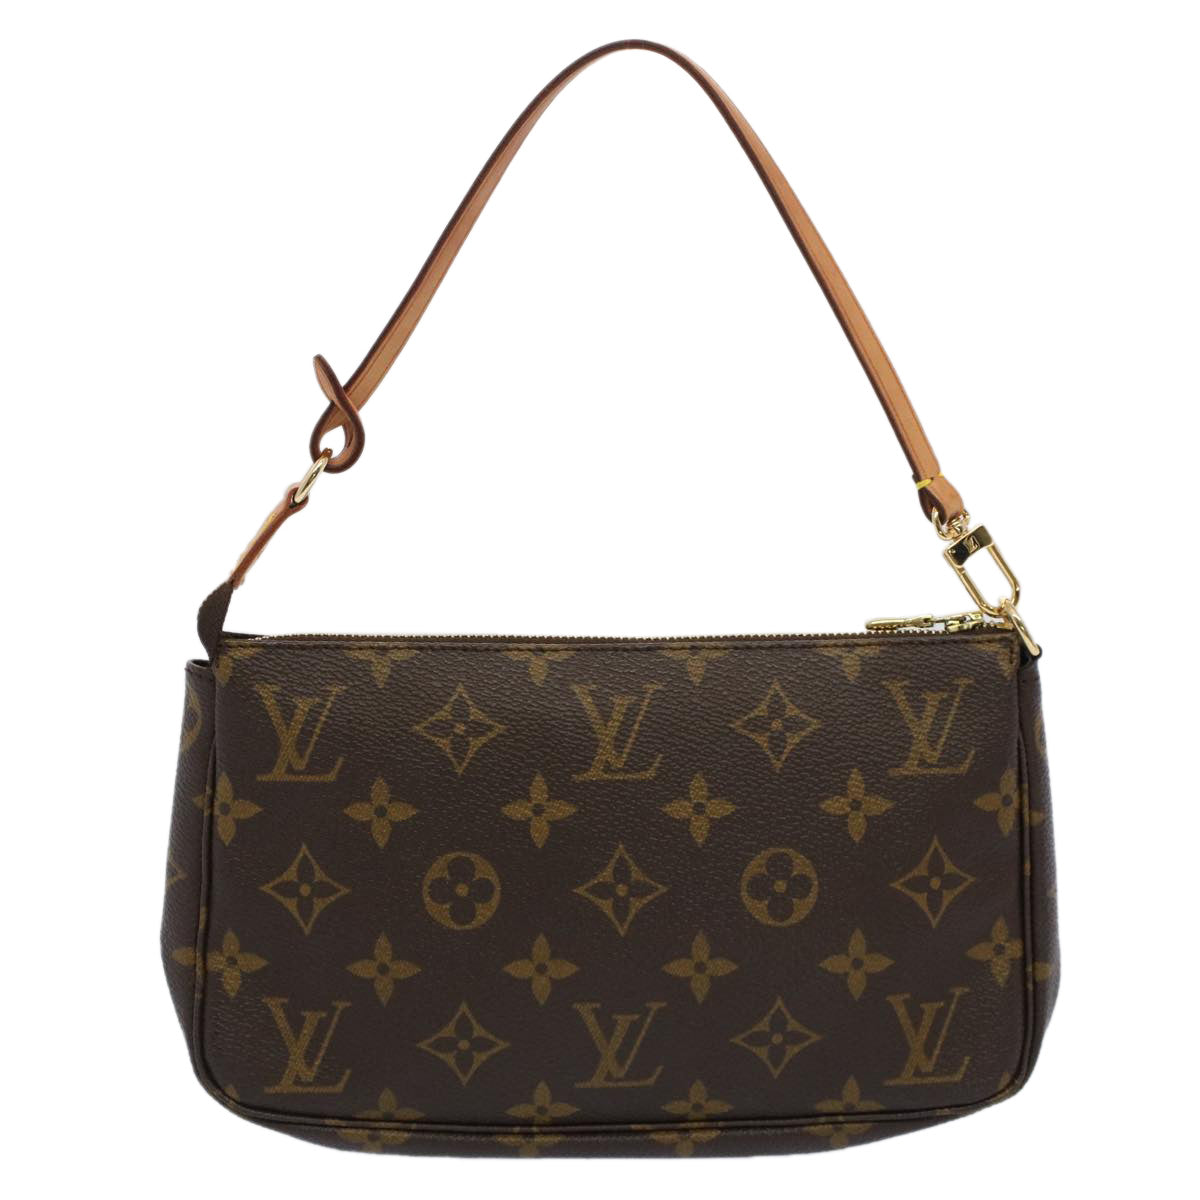 Louis Vuitton Women's Monogram Canvas Pouch with Protective Bag in Brown